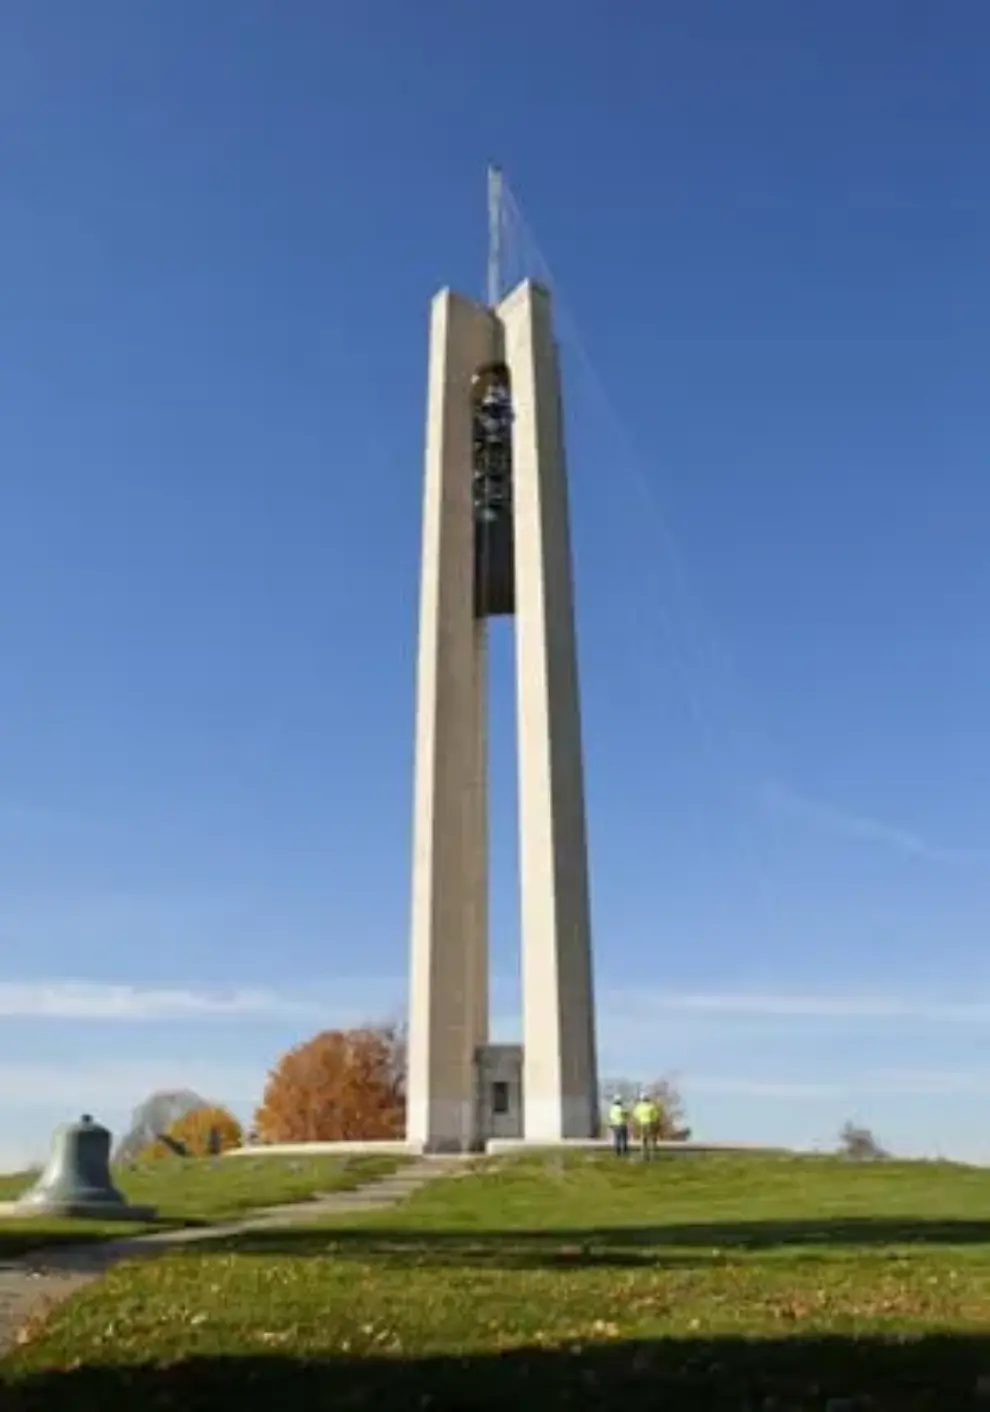 Carillon Tree of Light benefits from structural upgrade